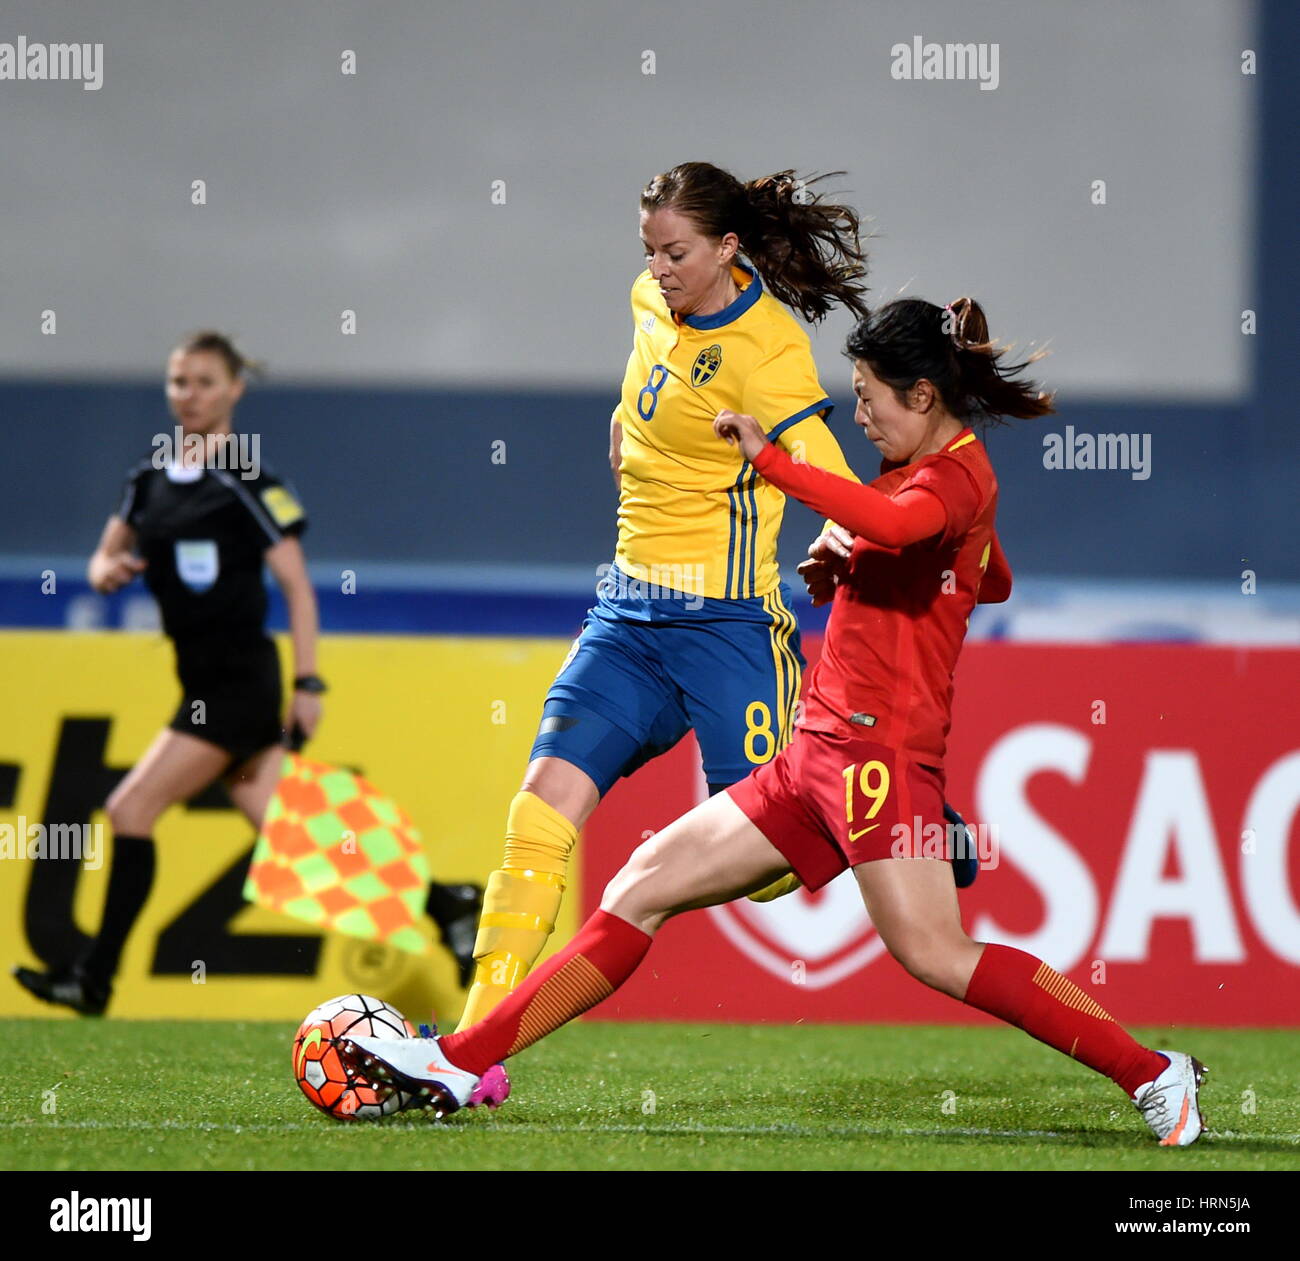 Albufeira, Portugal. 3rd Mar, 2017. Wang Yan (R) of China vies with Lotta Schelin of Sweden during a Group C match at the 2017 Algarve Cup women's football tournament in Albufeira, Portugal, March 3, 2017. The match ended with a draw 0-0. Credit: Zhang Liyun/Xinhua/Alamy Live News Stock Photo